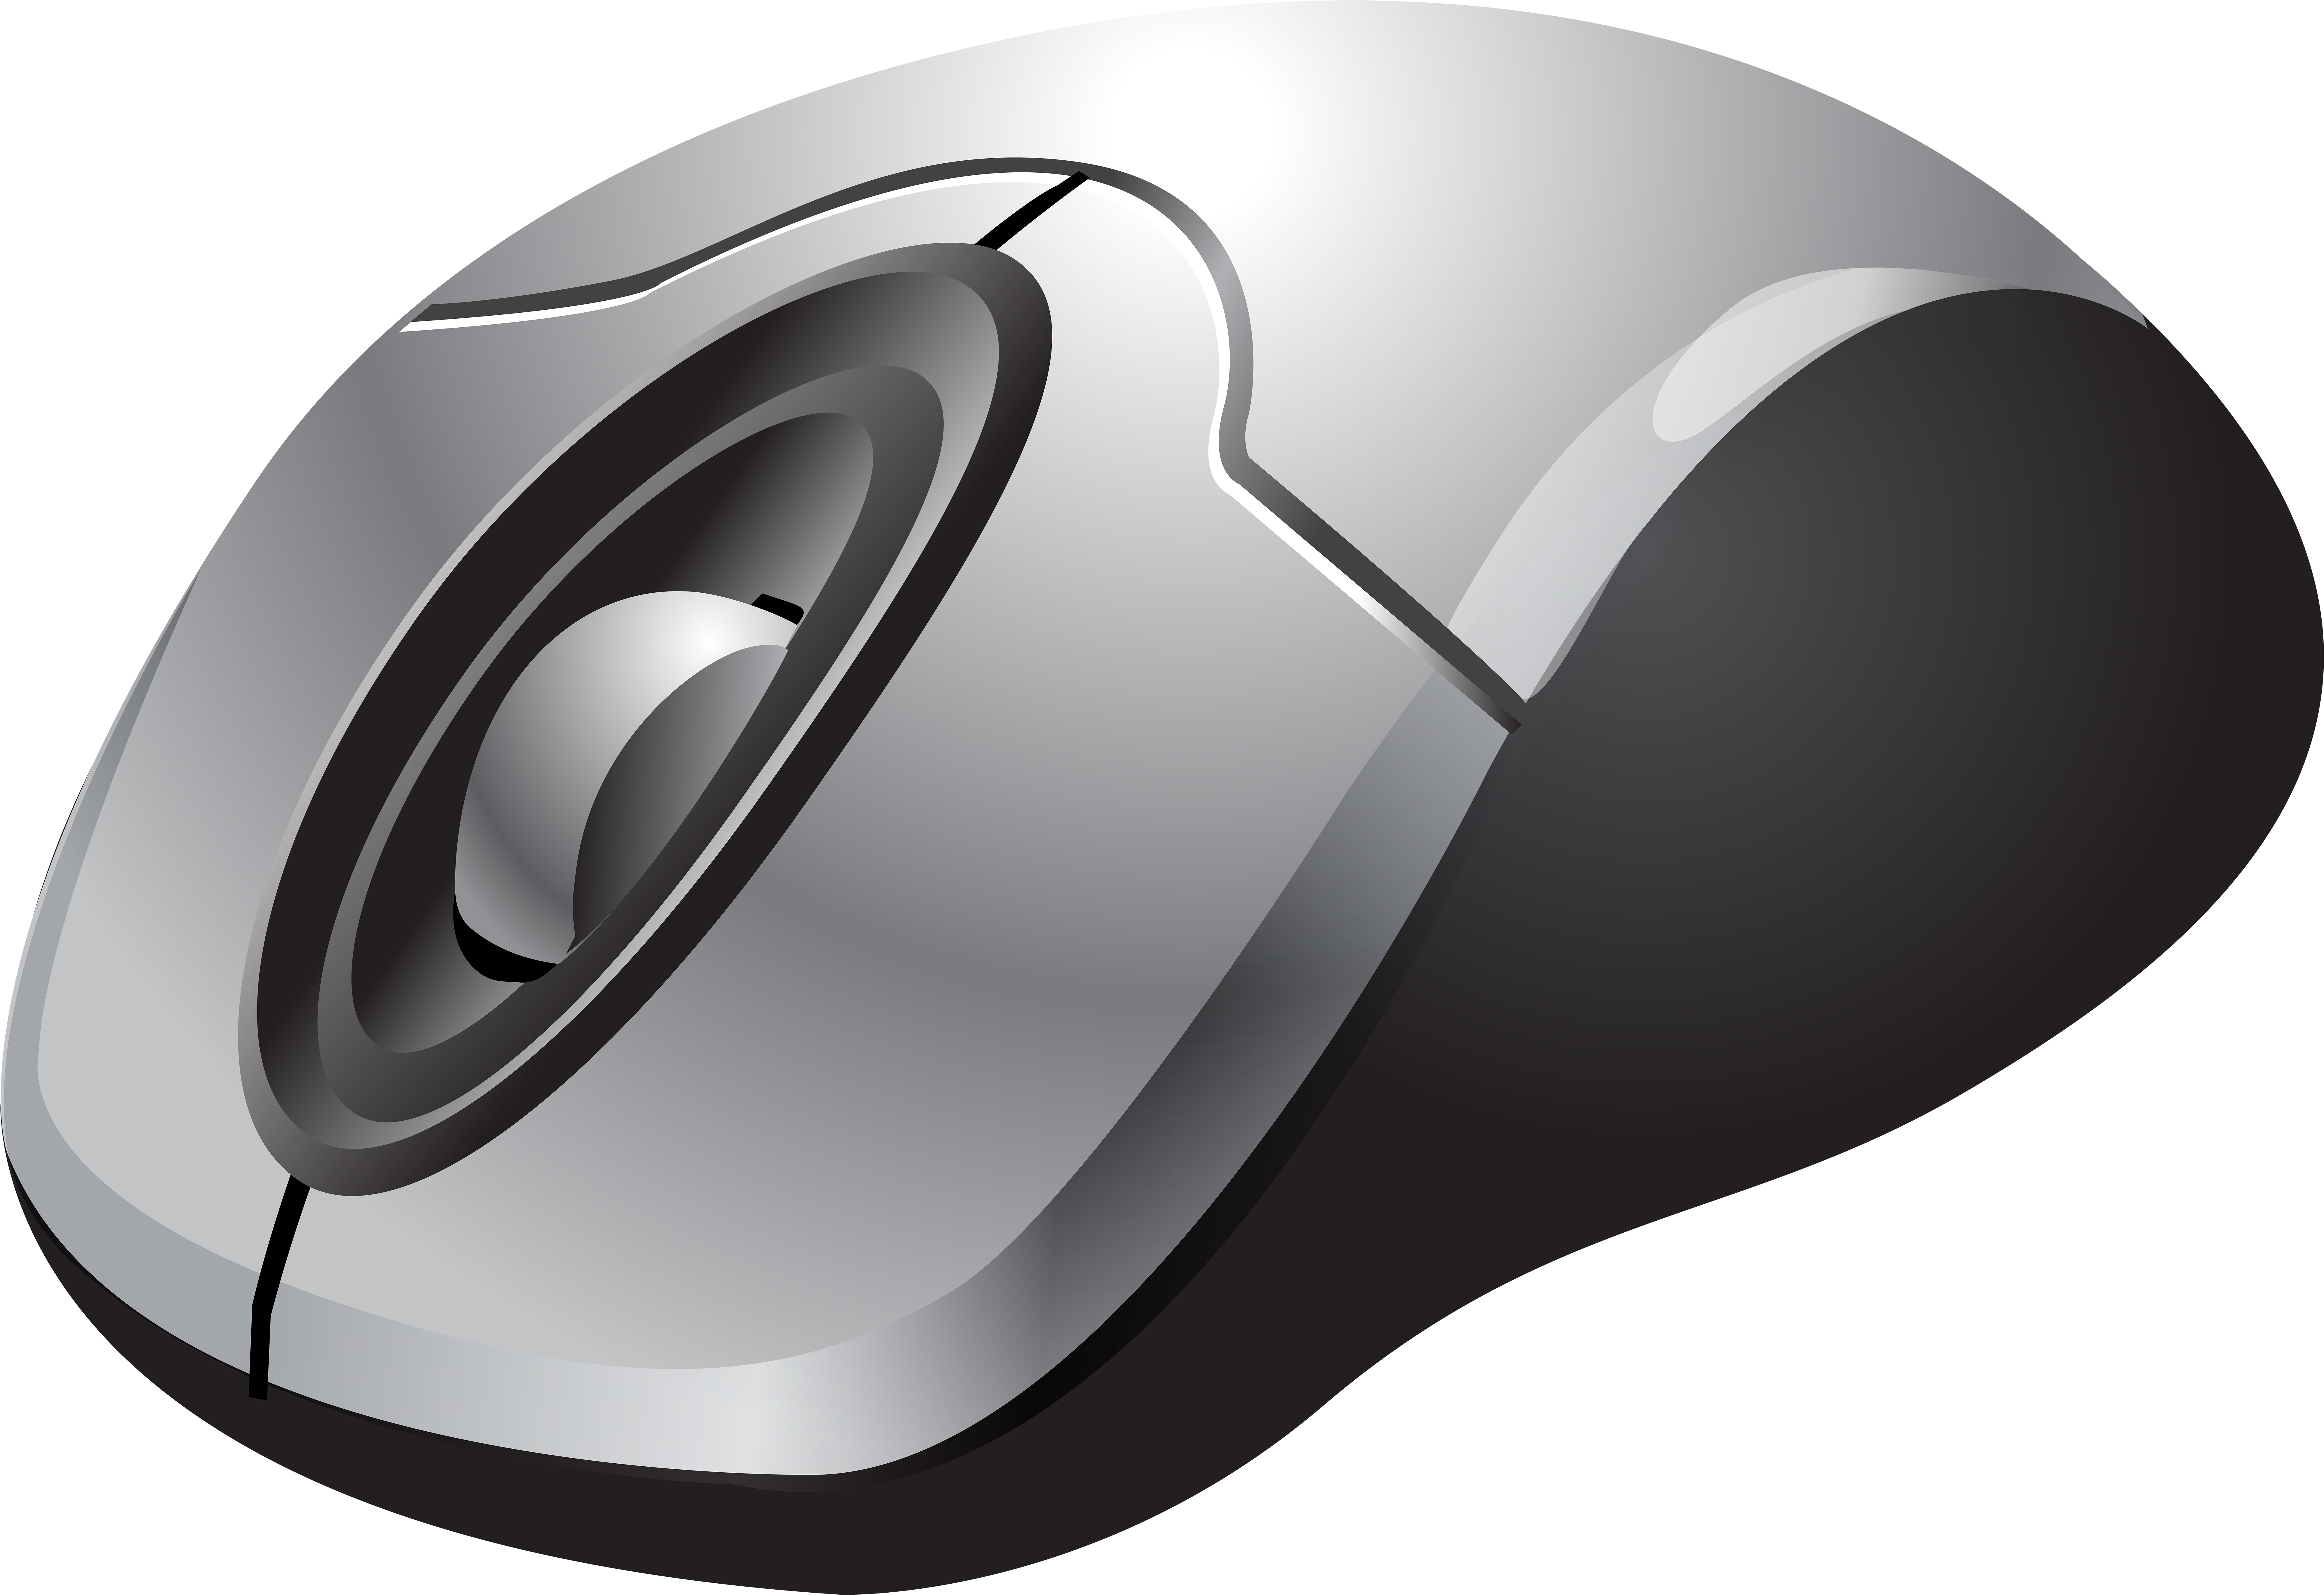 A Computer Mouse With A Round Wheel